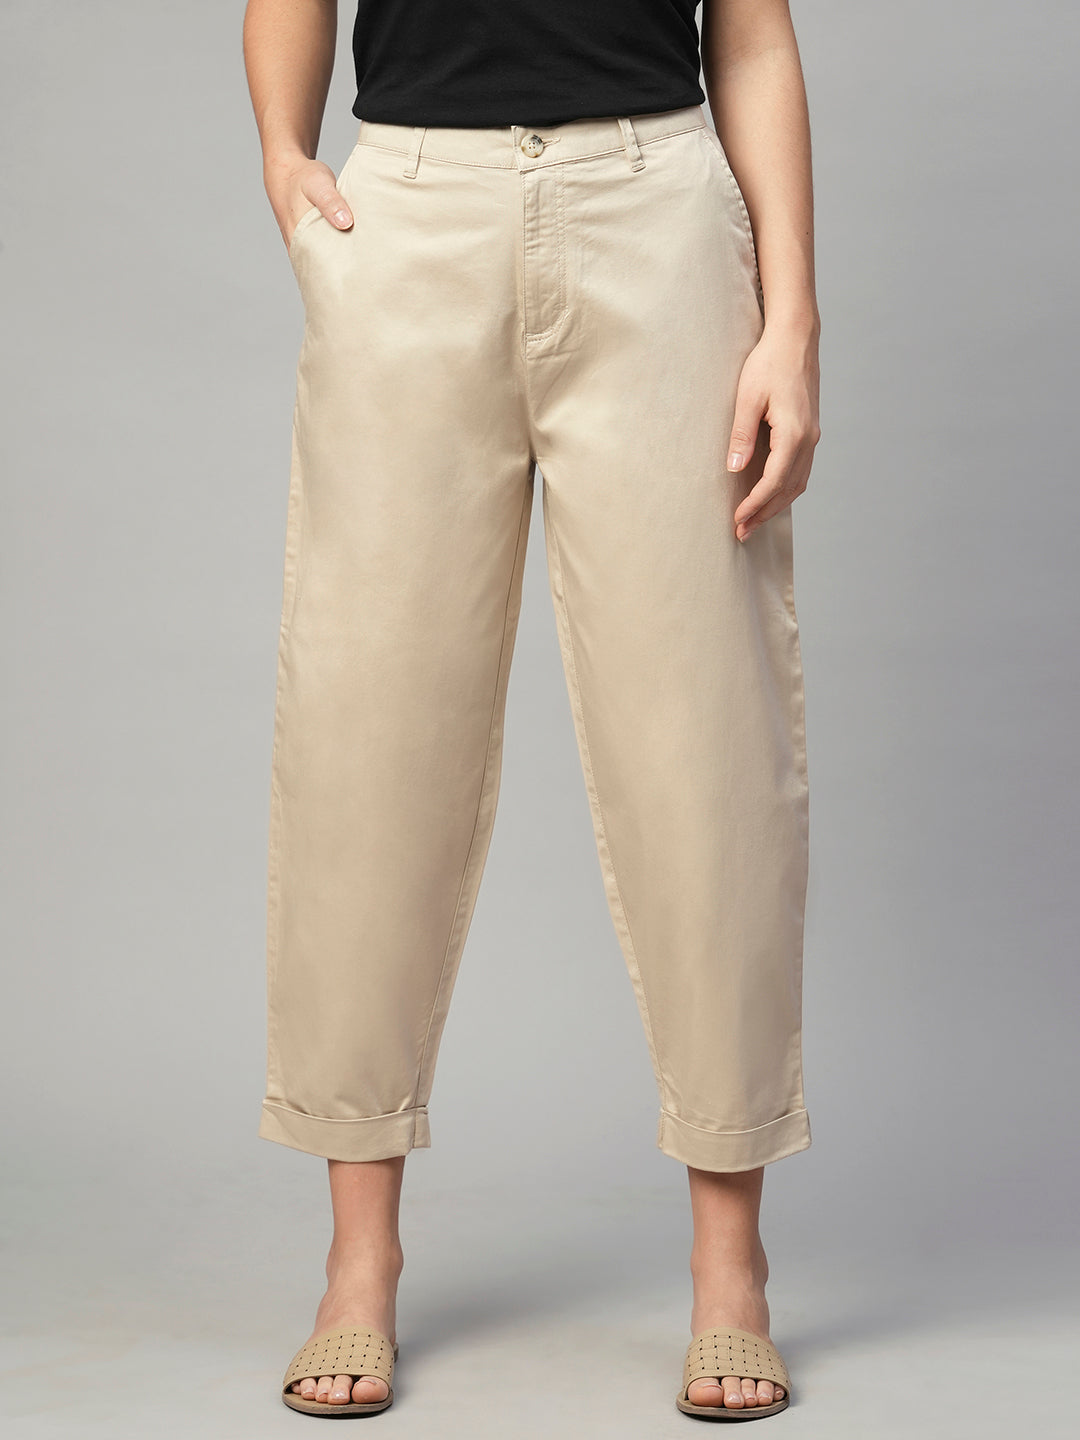 Solid Khaki Parachute Pants For Womens | Pronk – pronk.in